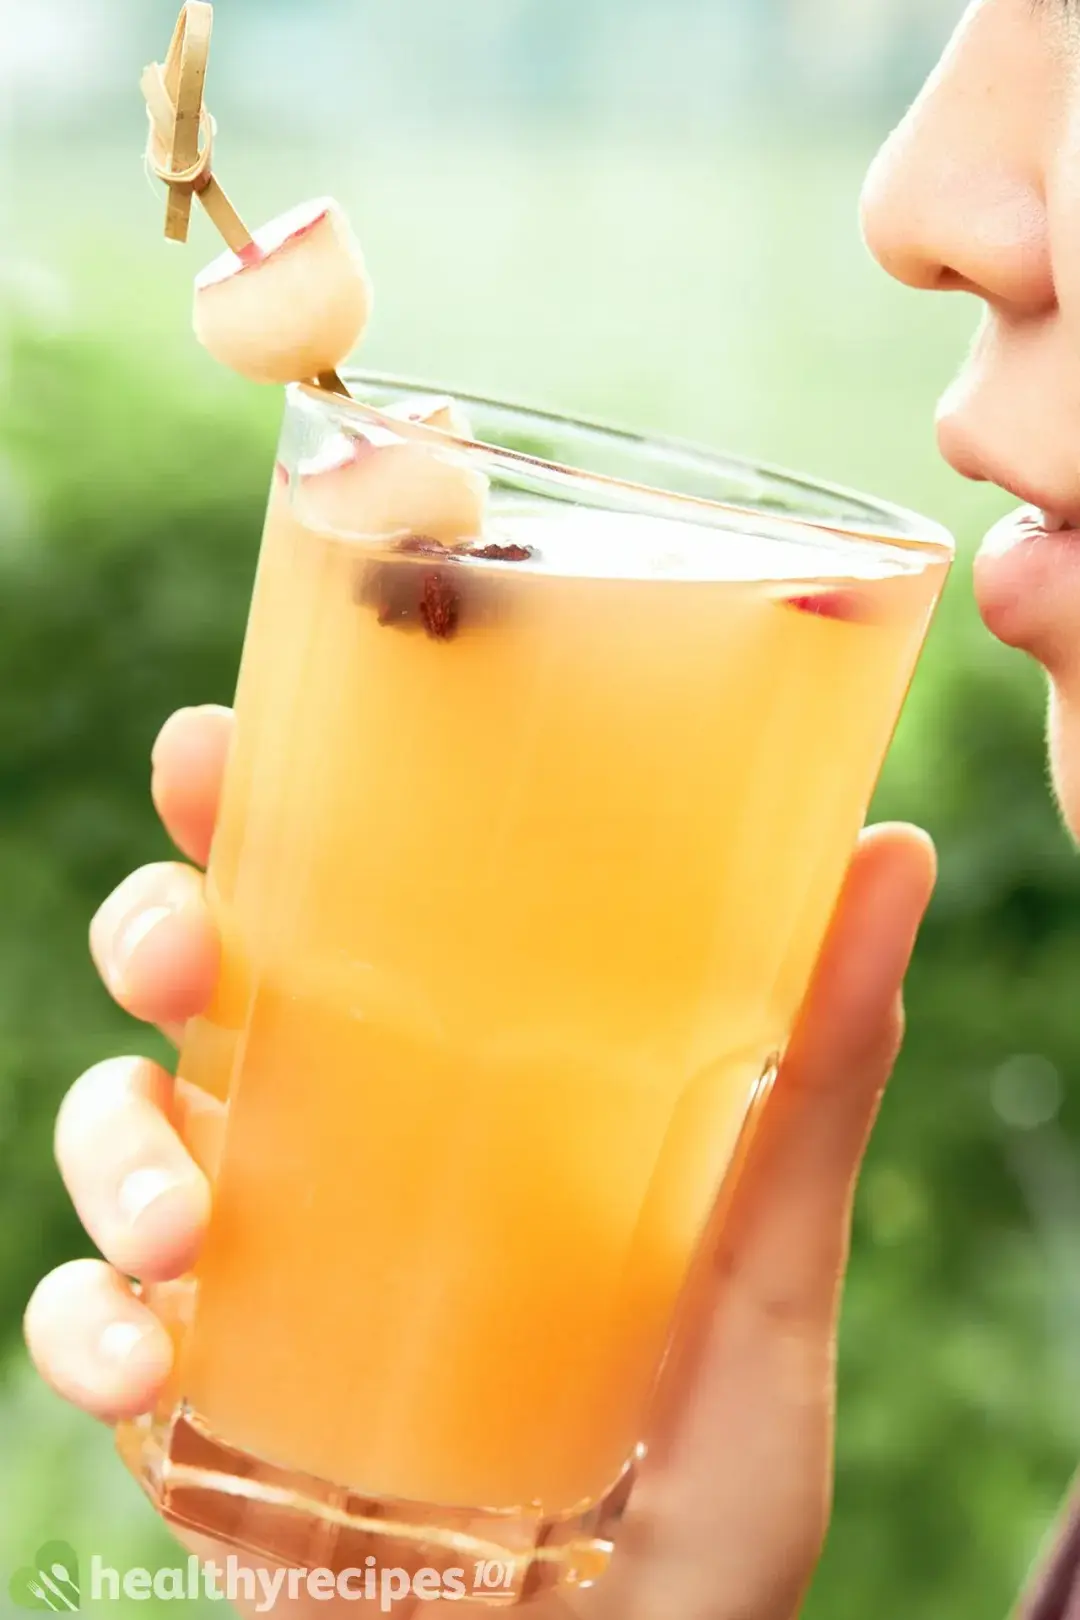 A person holding a tall glass filled with apple juice garnished with an apple balls skewer